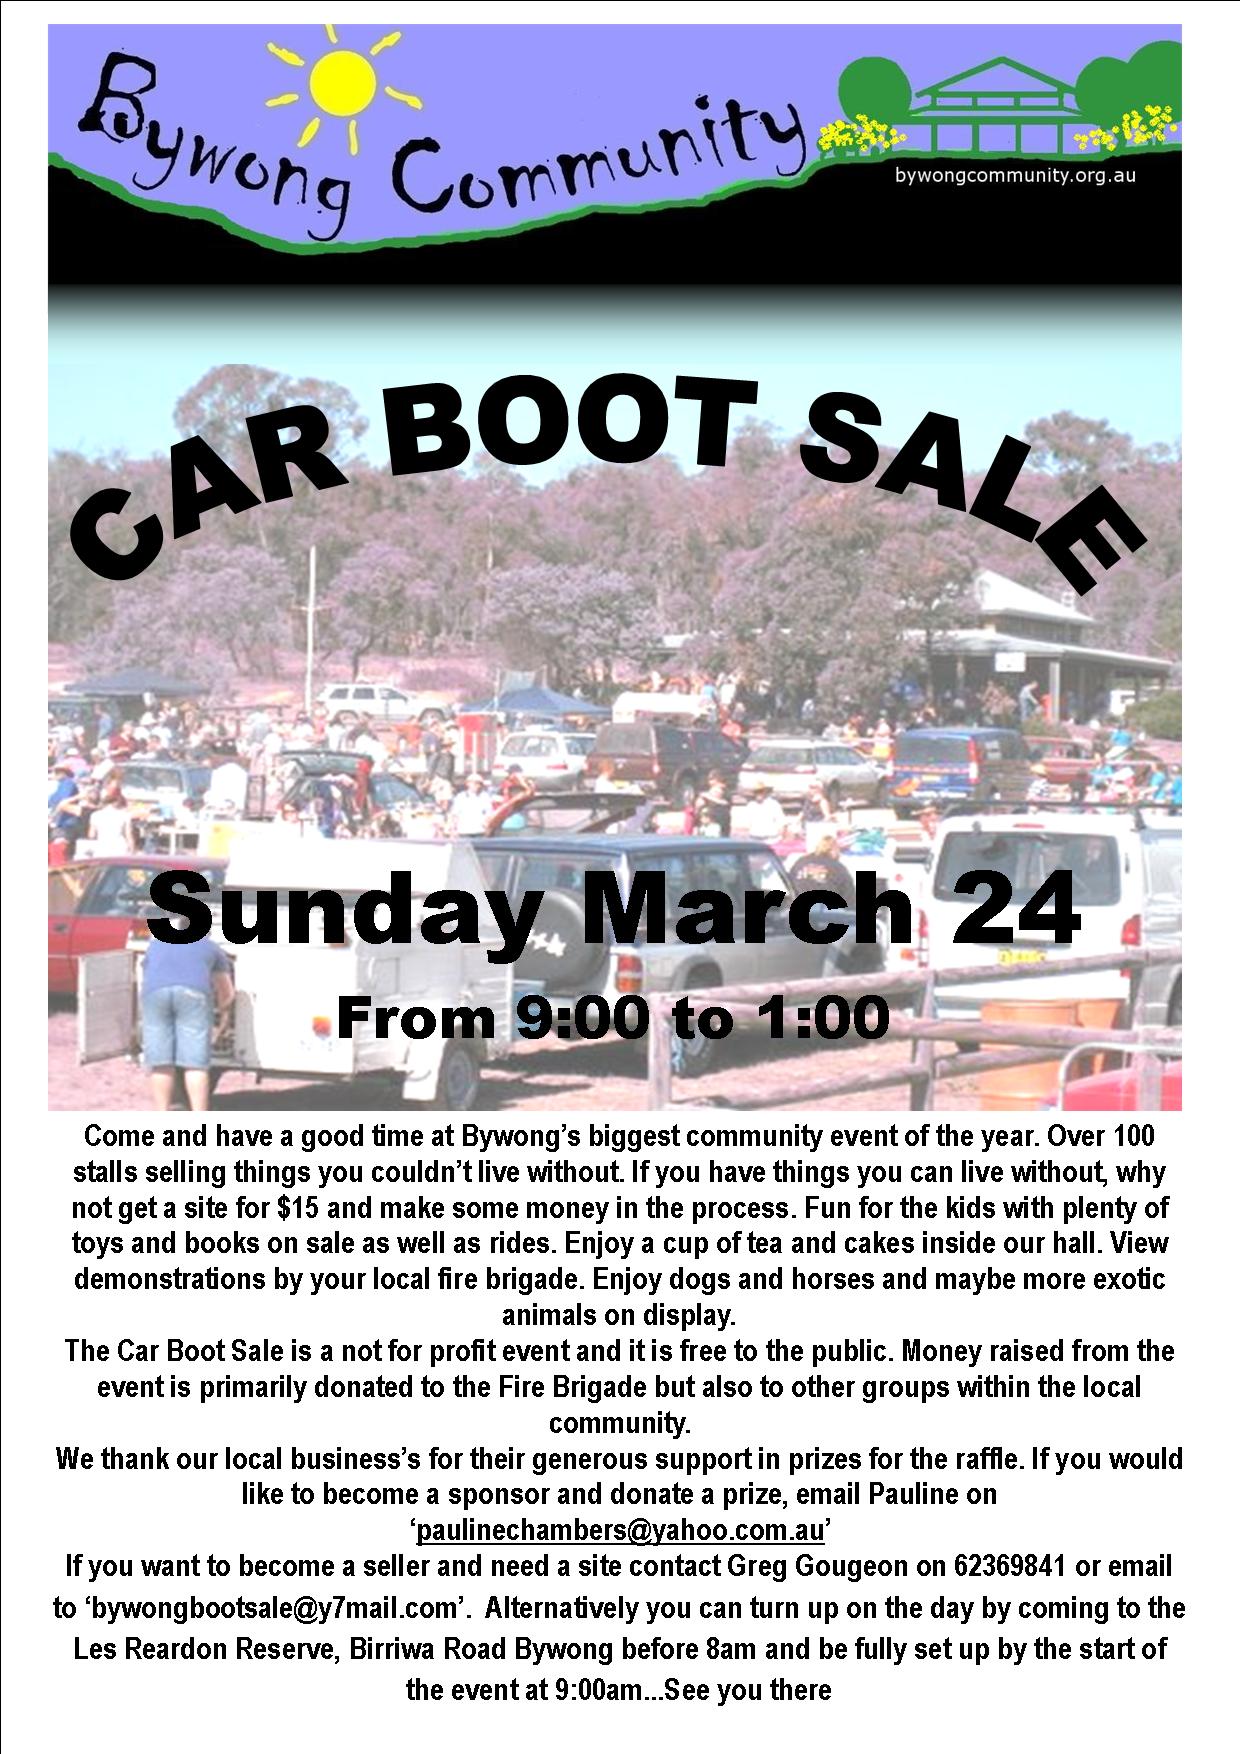 Bywong Car Boot Sale